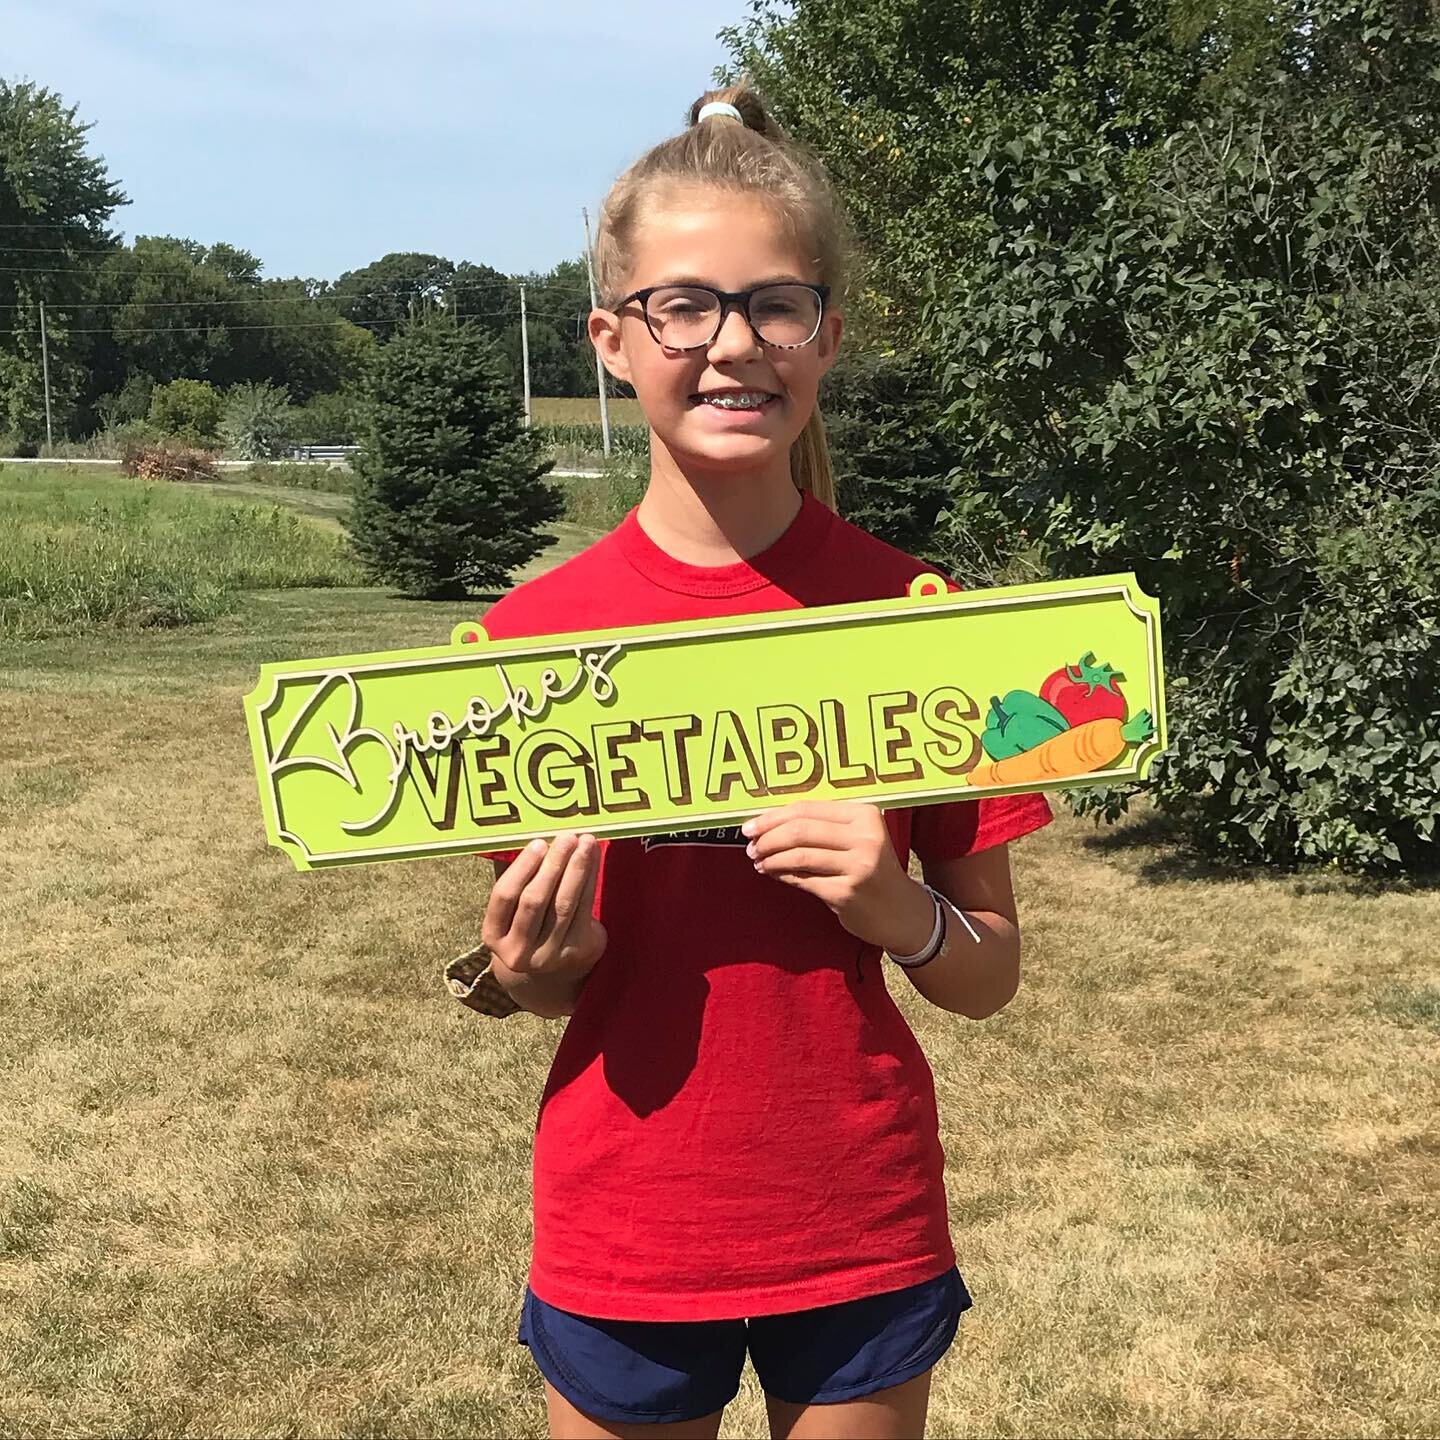 Today was awesome! I got to surprise my cousin’s daughter with her own legit business sign! She grew her own veggies and is now selling them from her own stand.  I love her entrepreneurial spirit but I thought she could use an eye catching sign! 

#s